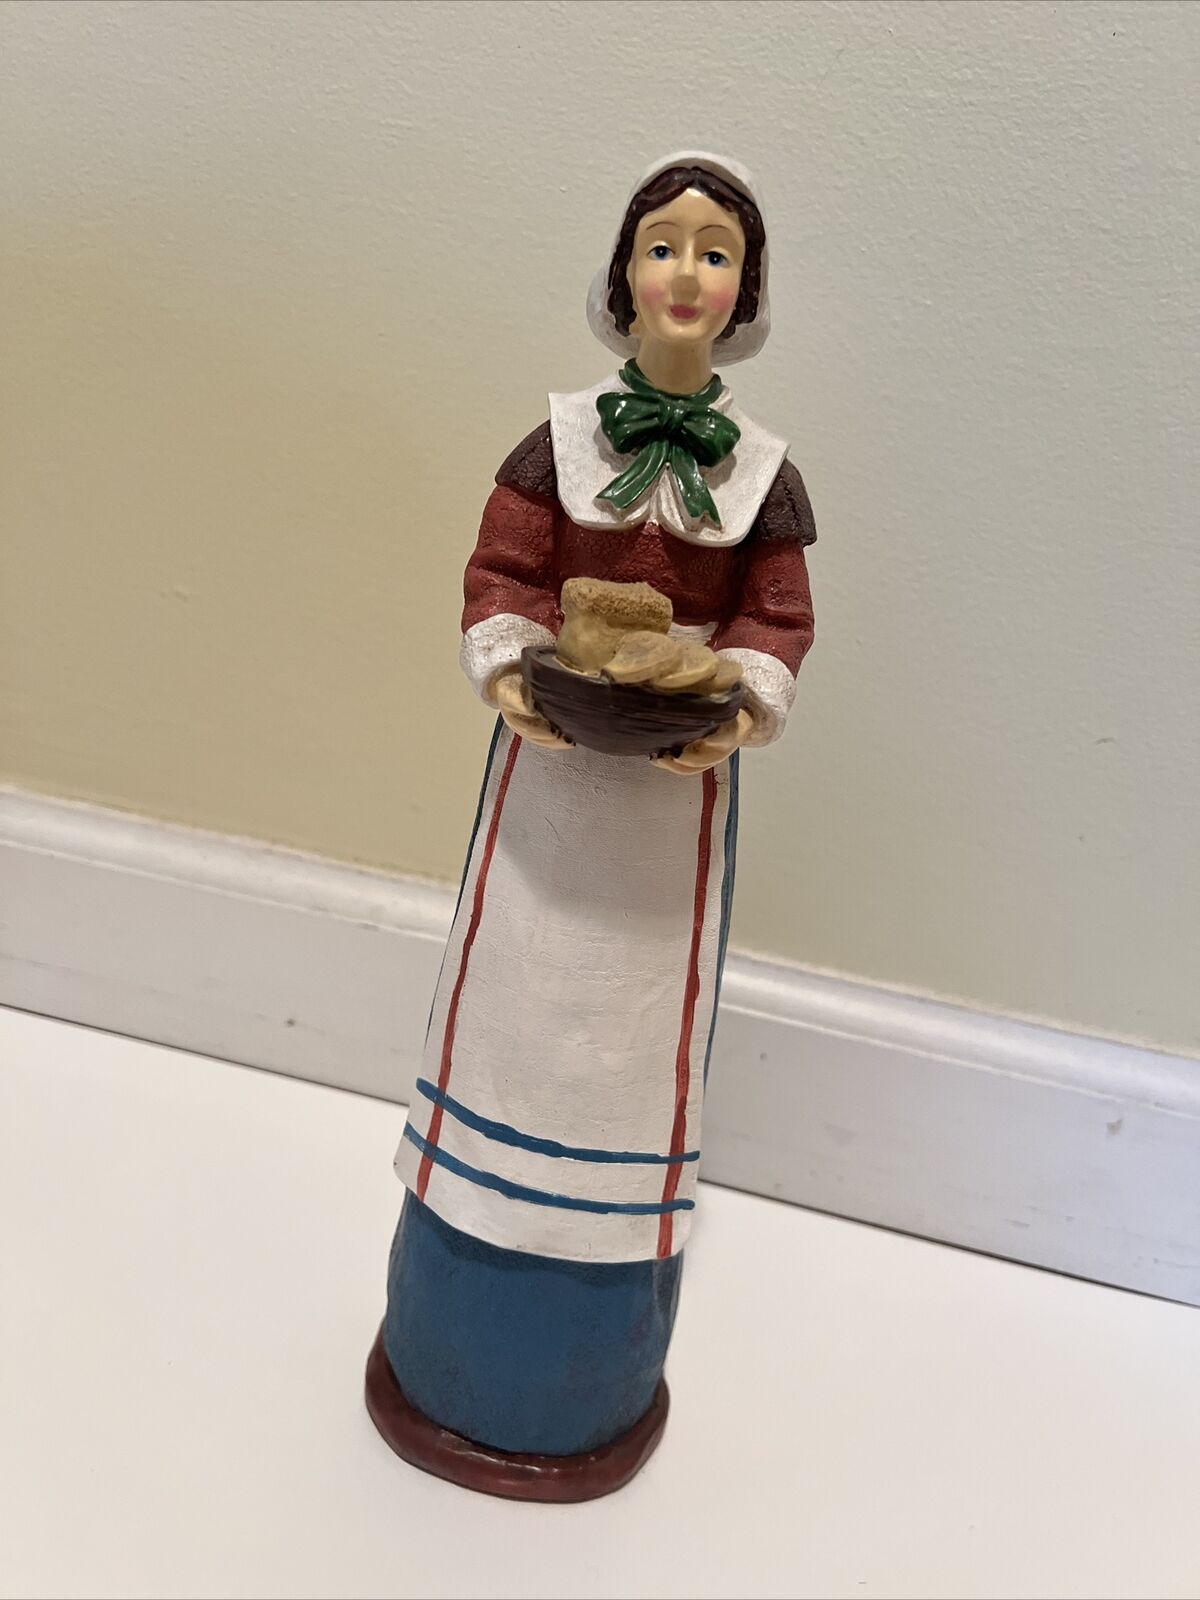 Vintage Ceramic Baker Woman Traditional Clothing 12 Inches Tall